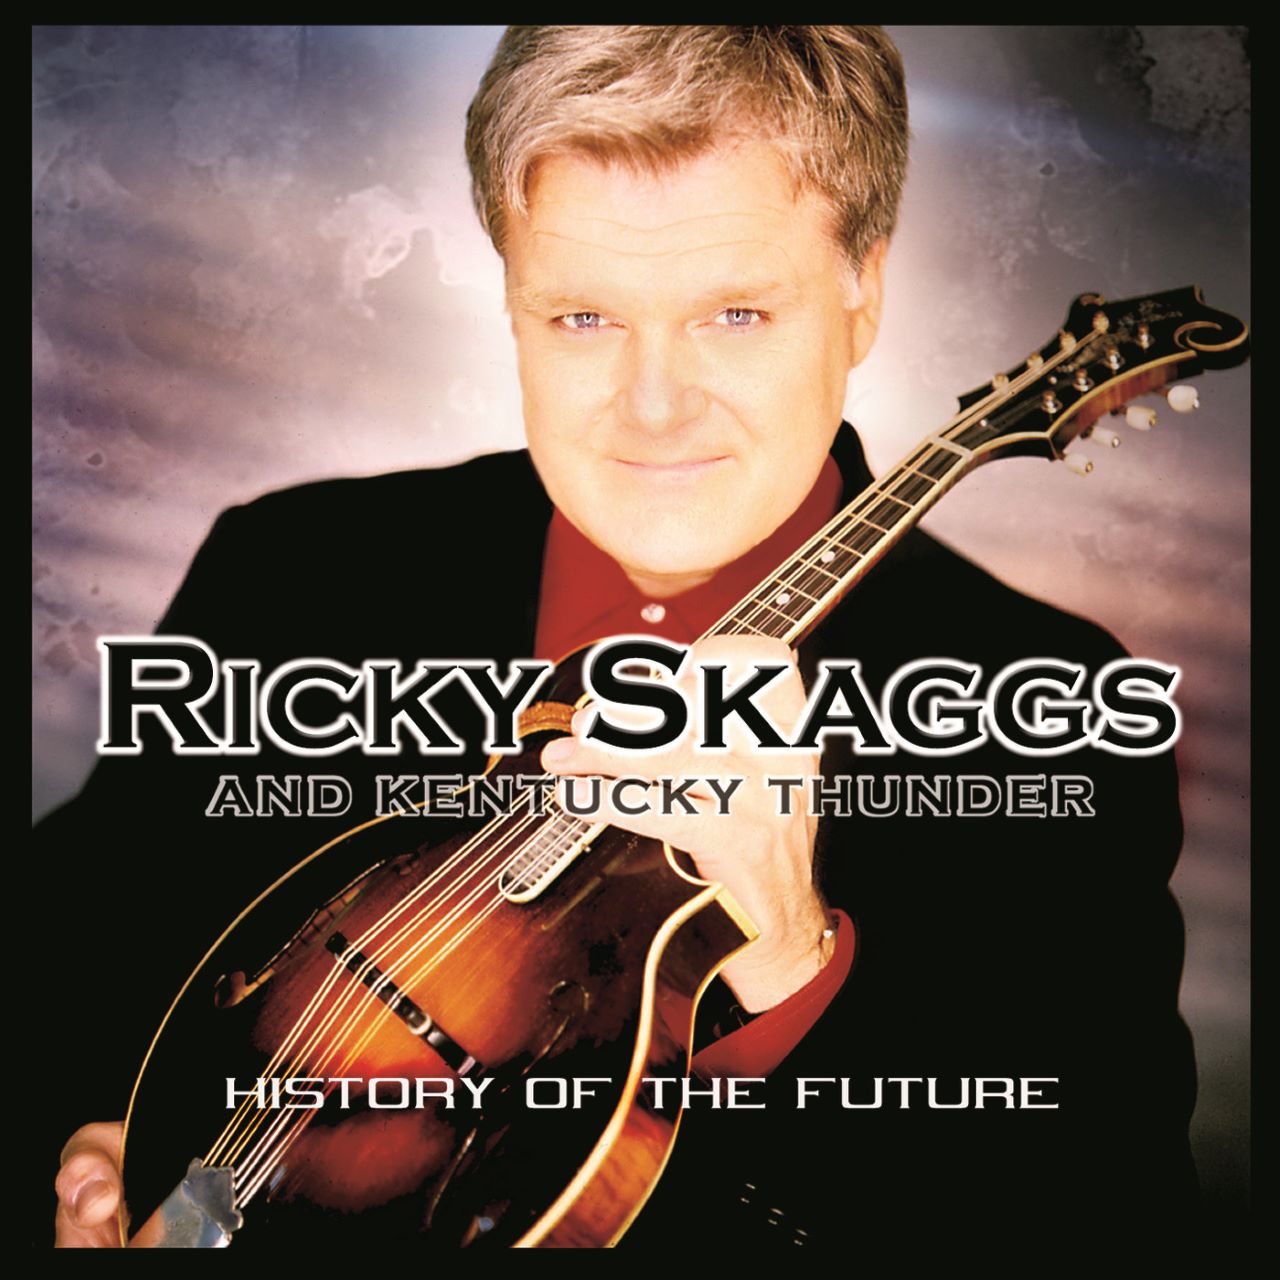 Ricky Skaggs - History Of The Future cover album